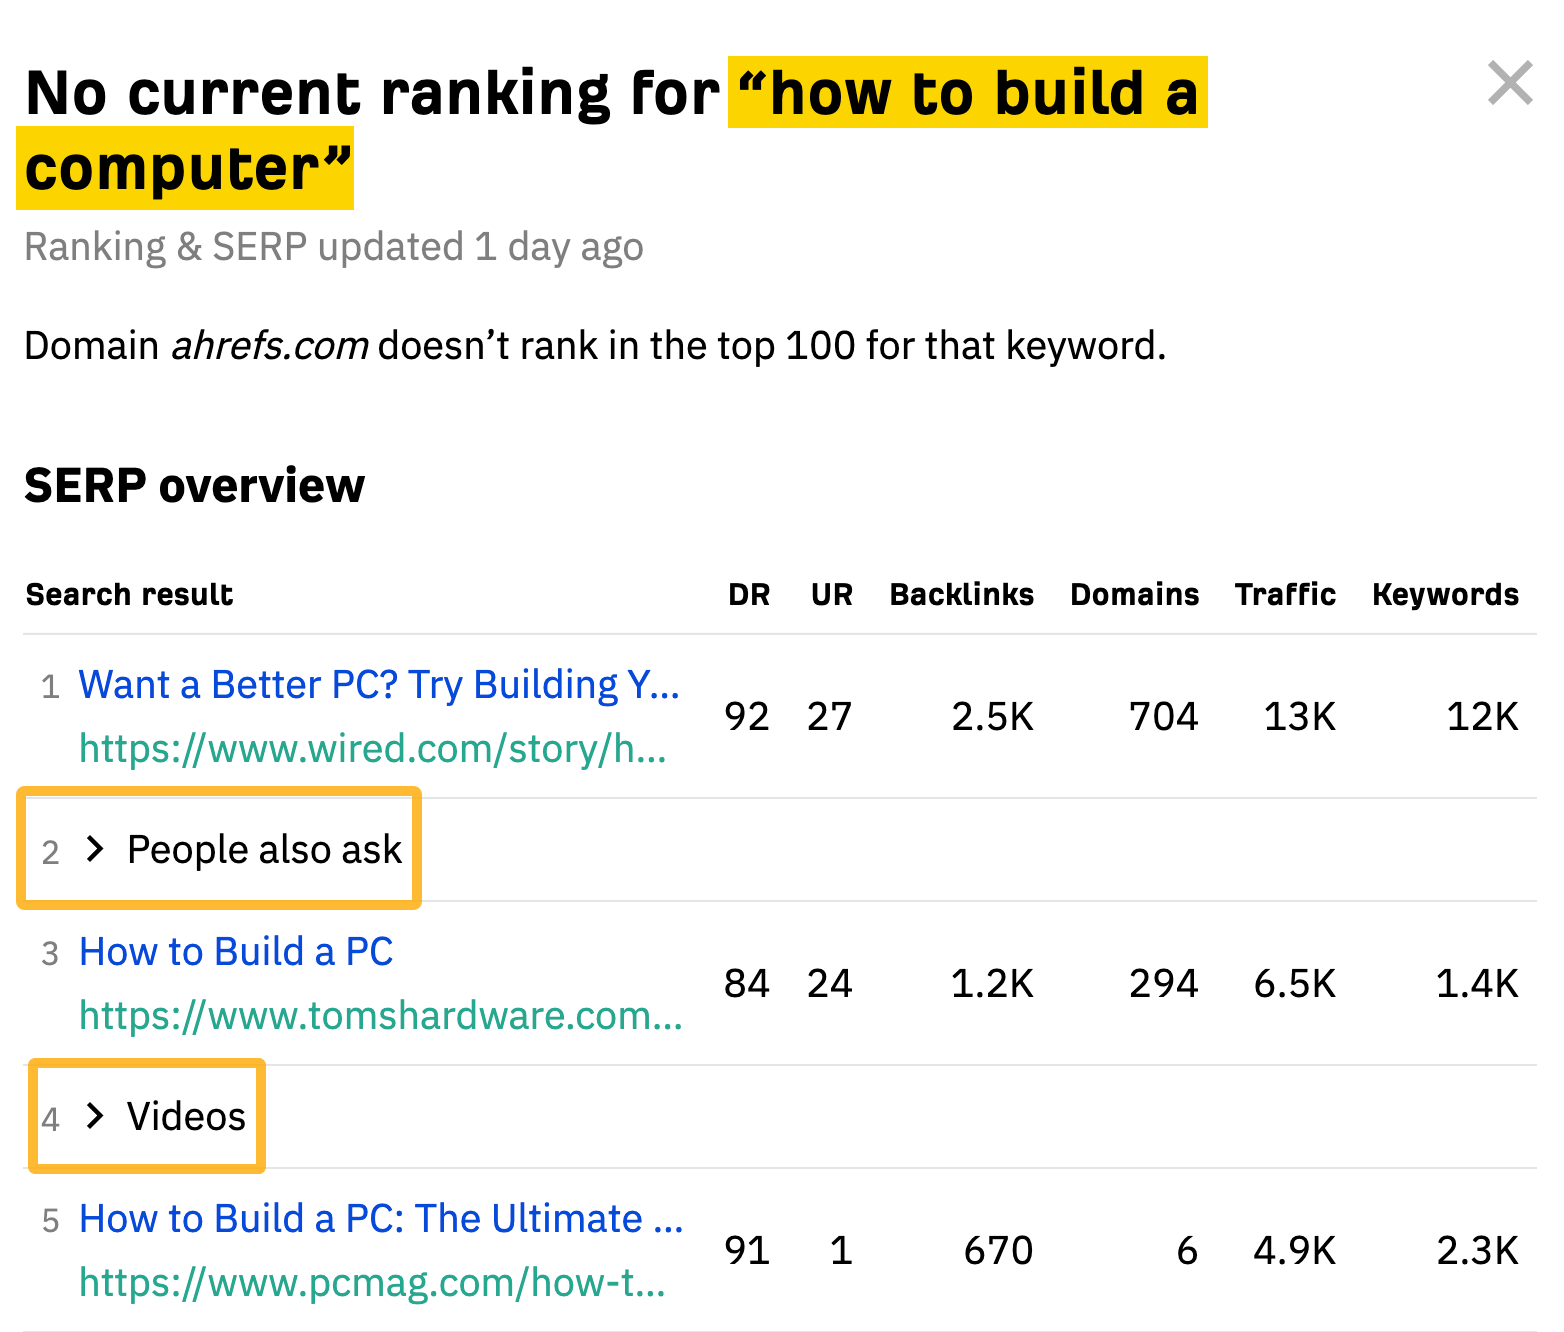 Ahrefs' SERP overview showing how we count positions of search results
